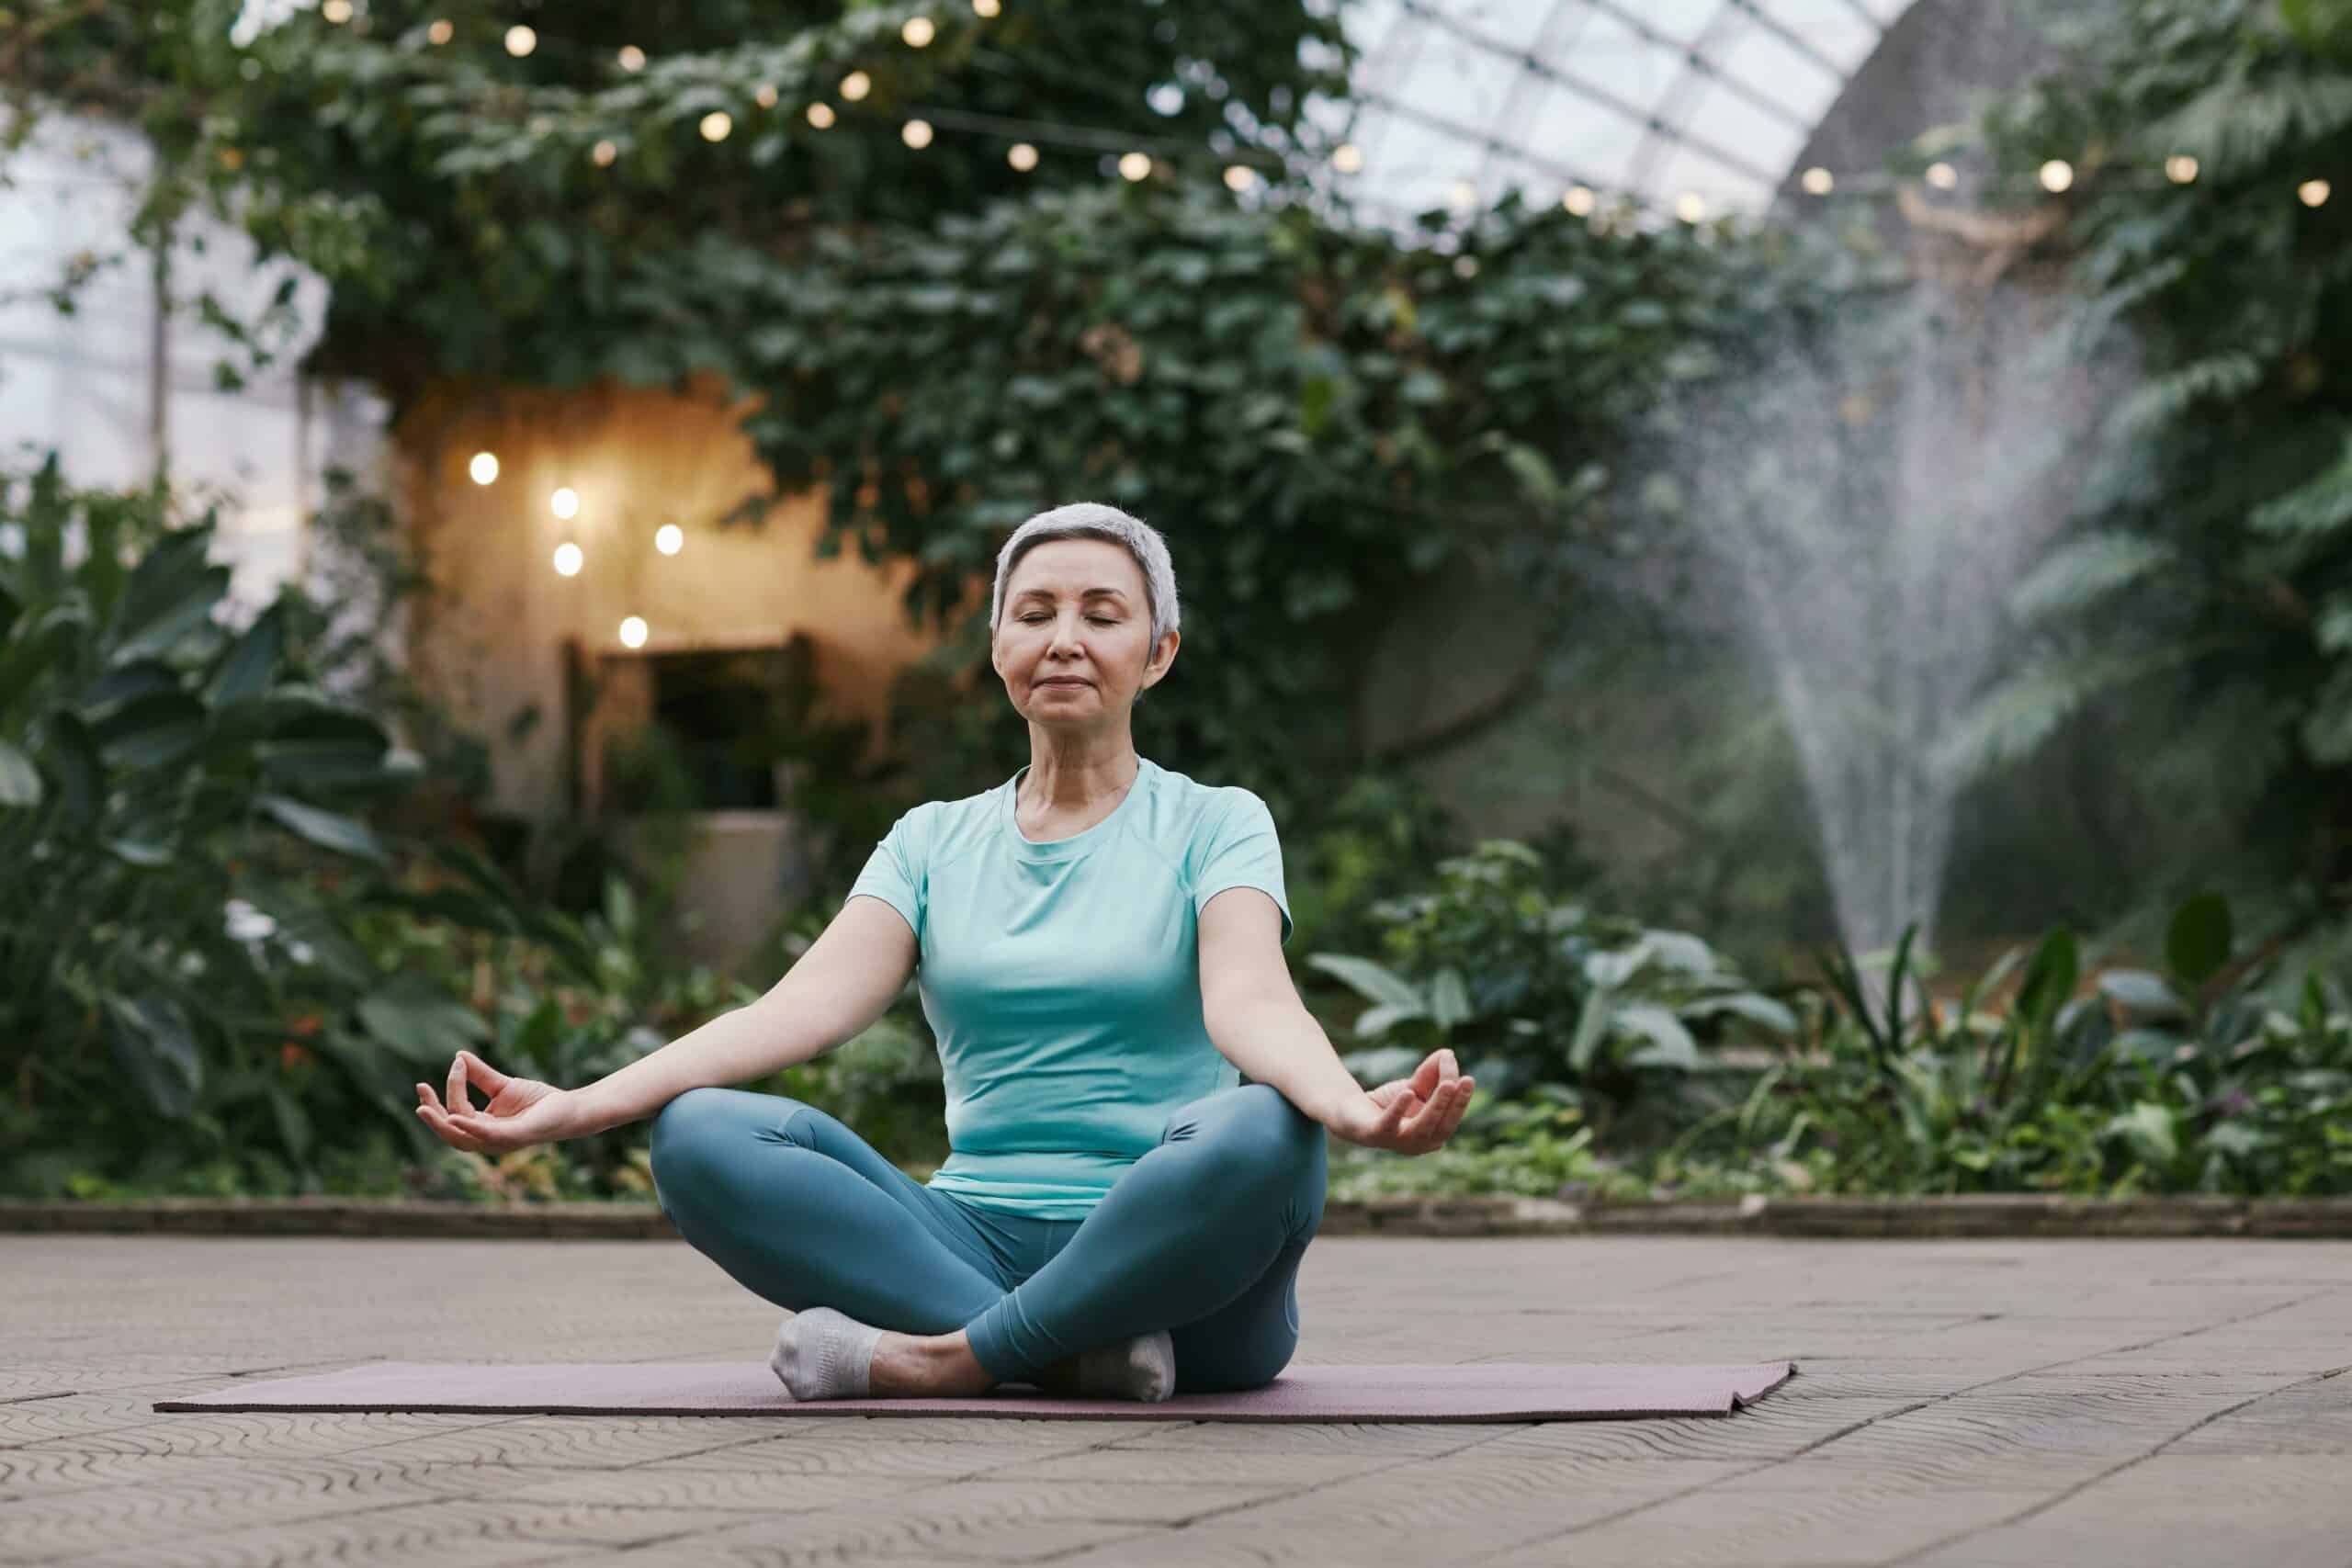 woman meditating peacefully in a serene greenhouse setting